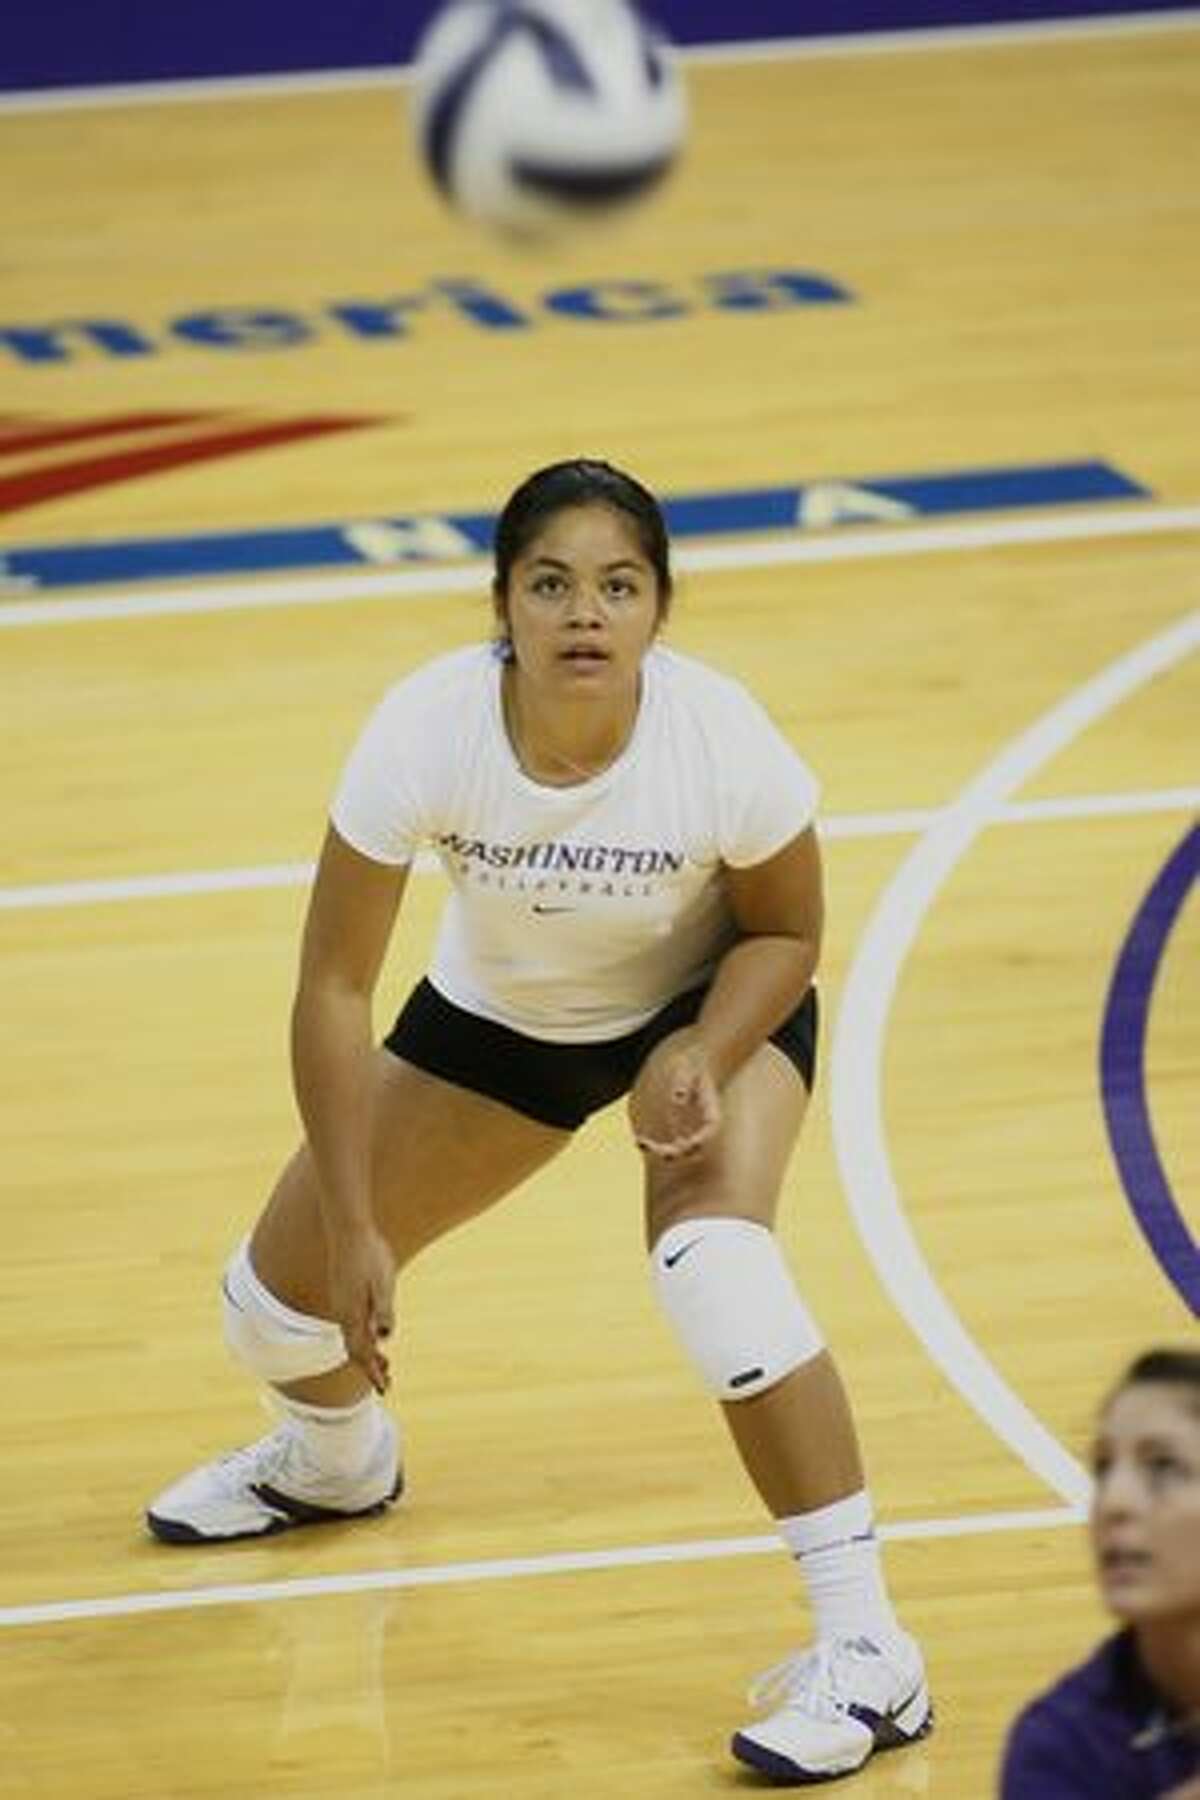 Tamari Miayshiro tracks the ball during practice. UW Volleyball team practice at Hec Ed. Wednesday, September 24, 2008 Seattle. Photograph by Grant M. Haller/Seattle Post-Intelligencer